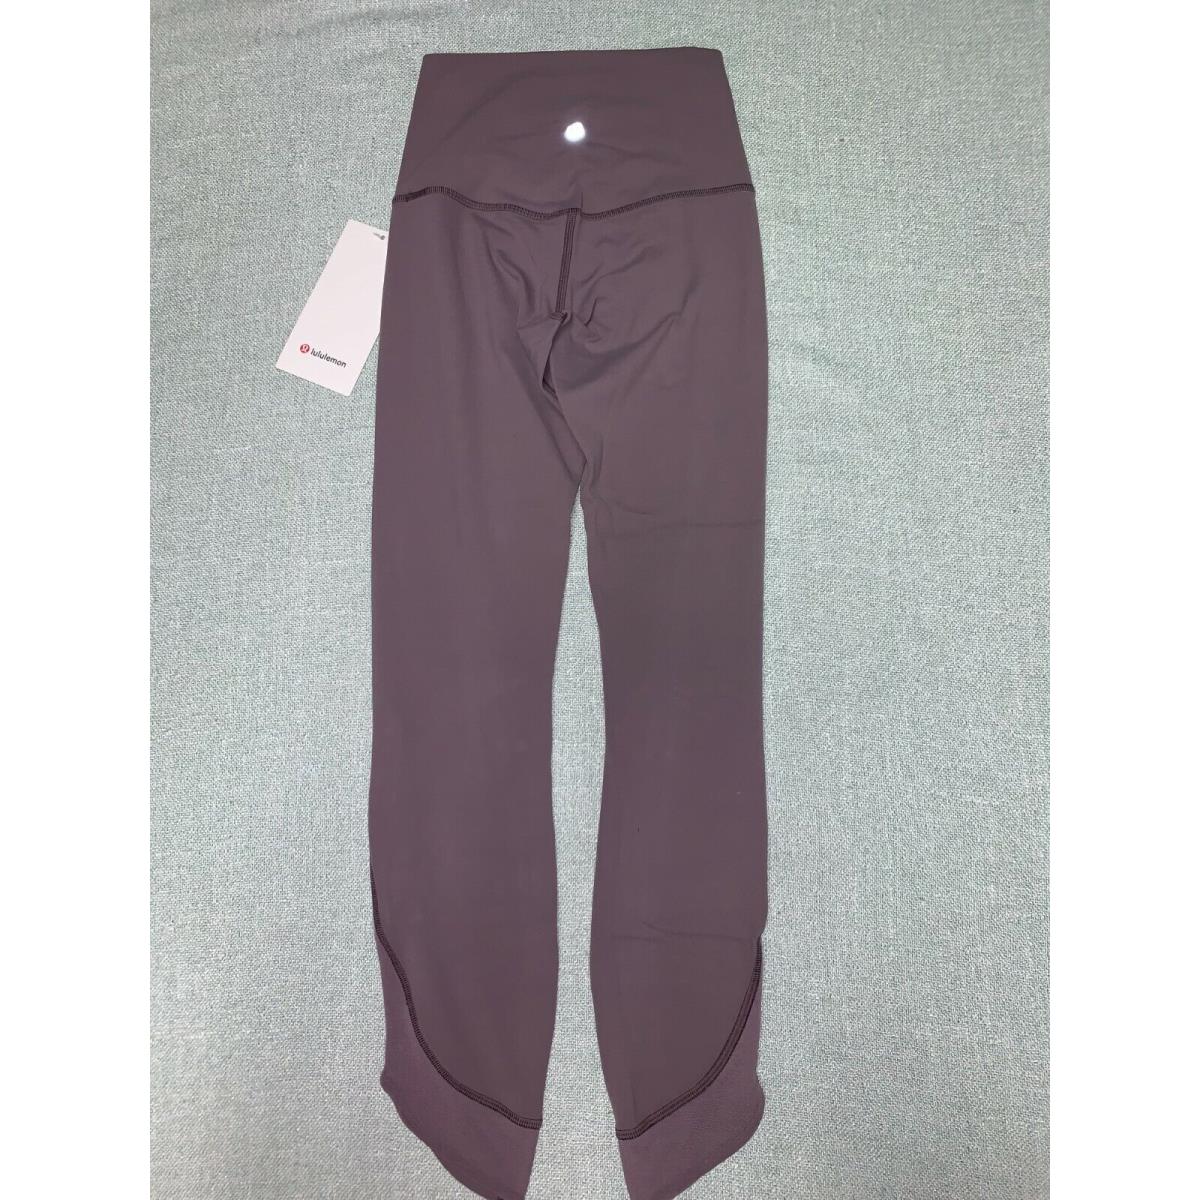 Lululemon clothing  - Frosted Mulberry 3